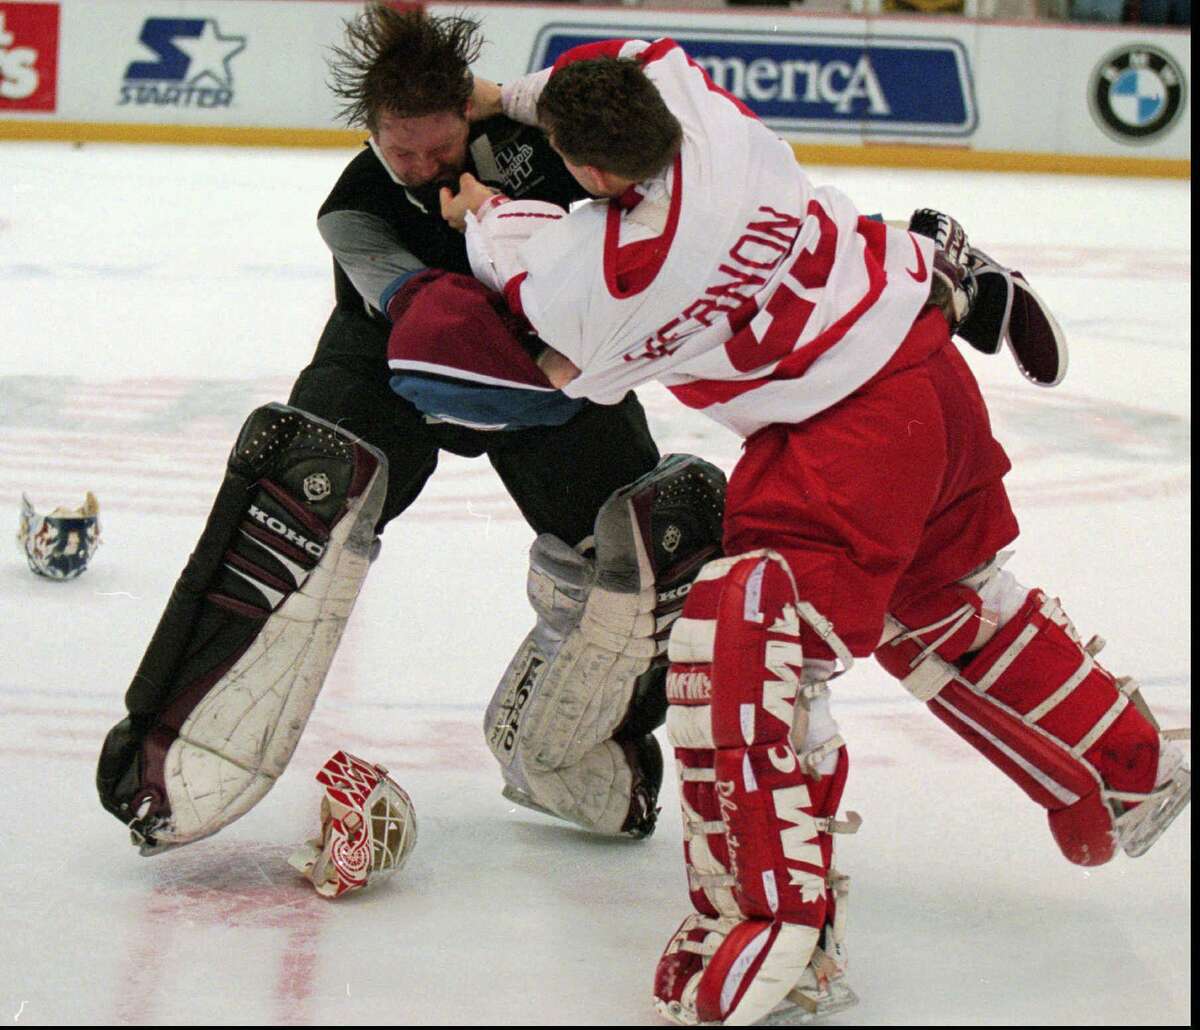 Detroit goaltender Mike Vernon and Colorado counterpart Patrick Roy slug it out during a March 1997 game. The Red Wings-Avalanche rivalry of the late 1990s is the subject of a new ESPN film "Unrivaled" that premieres Sunday afternoon.